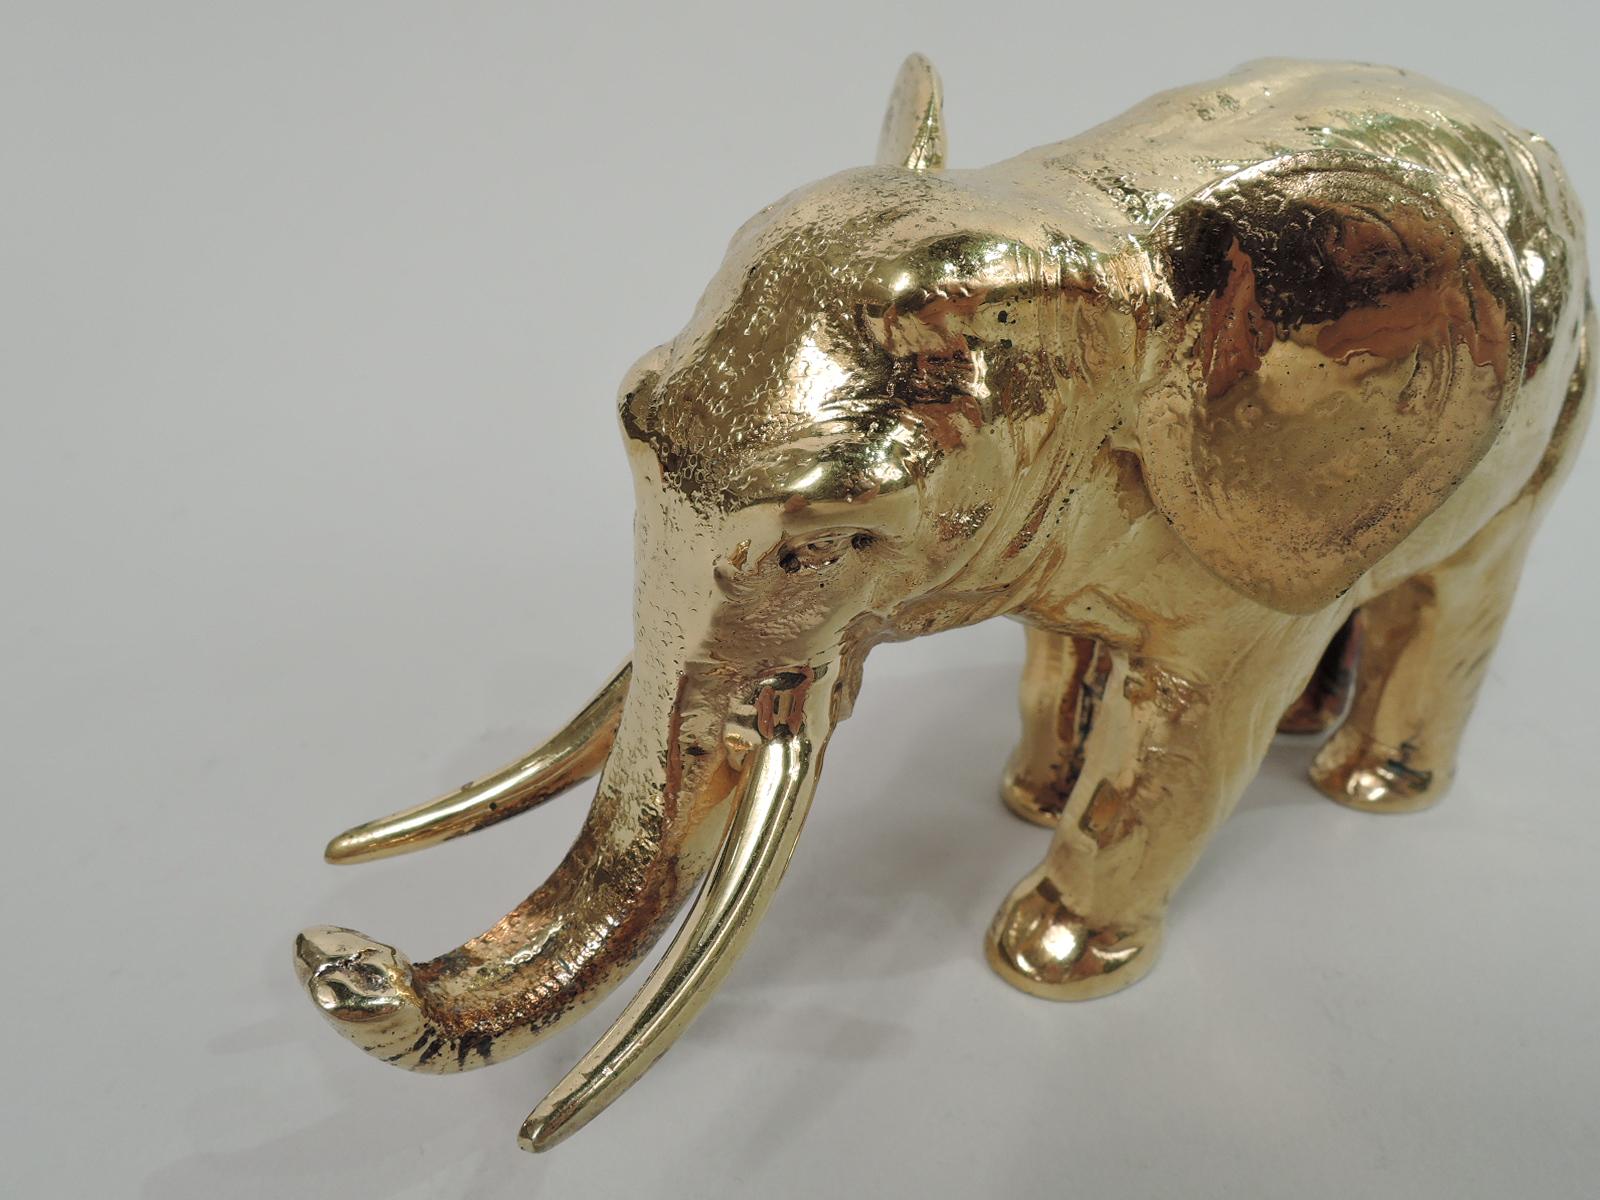 20th Century Antique German Silver Gilt Elephant Animal Figure with Upturned Trunk